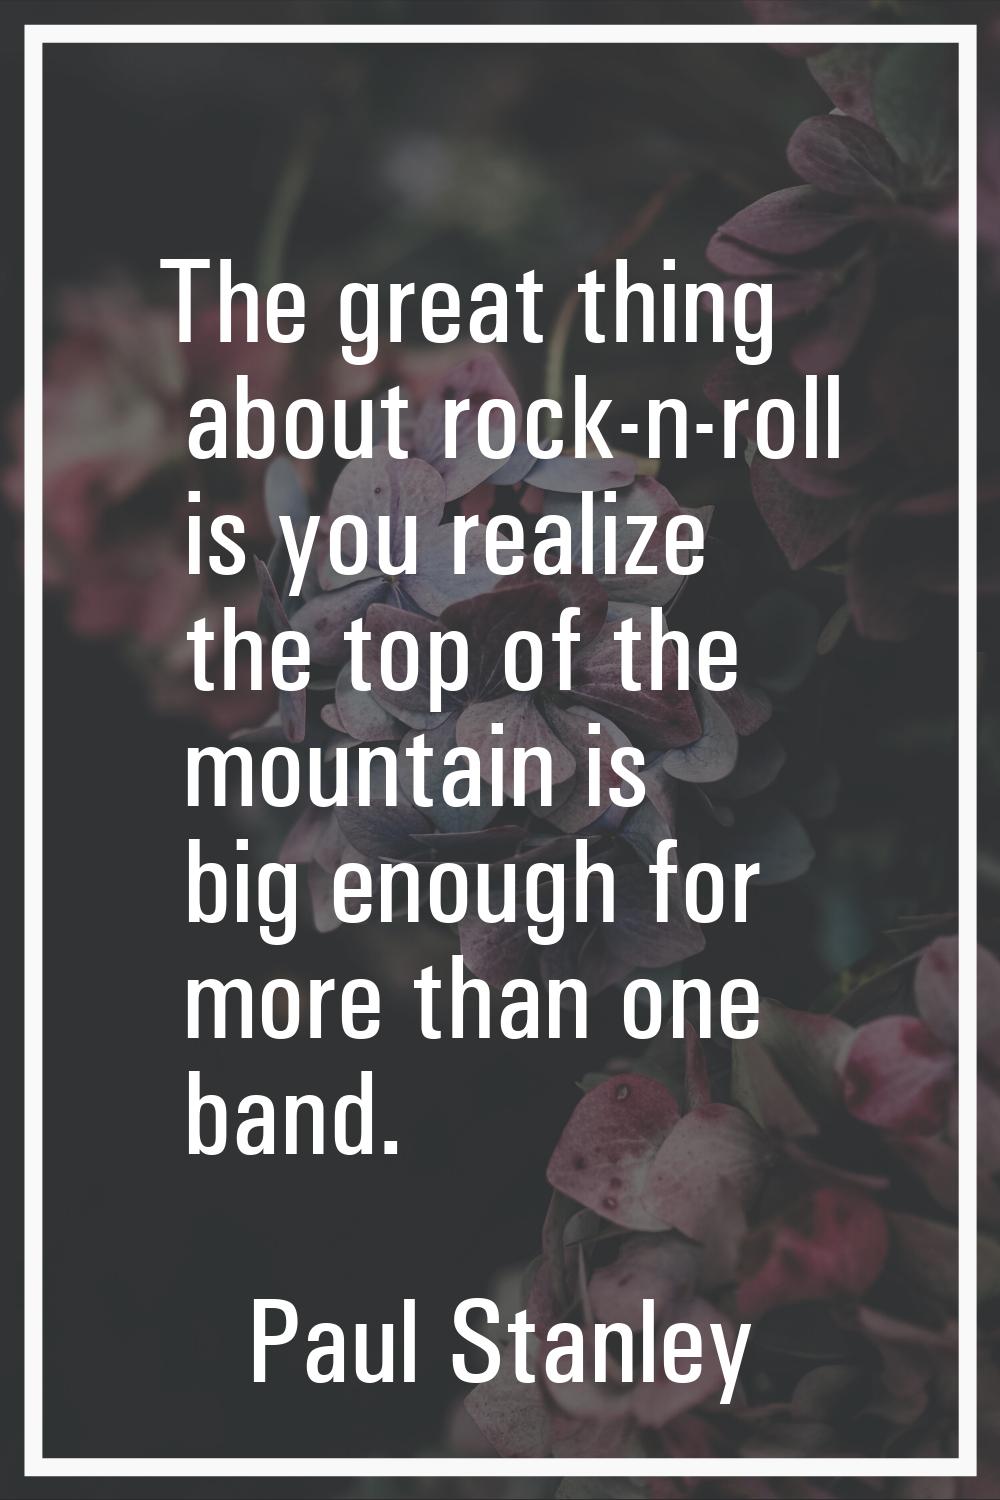 The great thing about rock-n-roll is you realize the top of the mountain is big enough for more tha